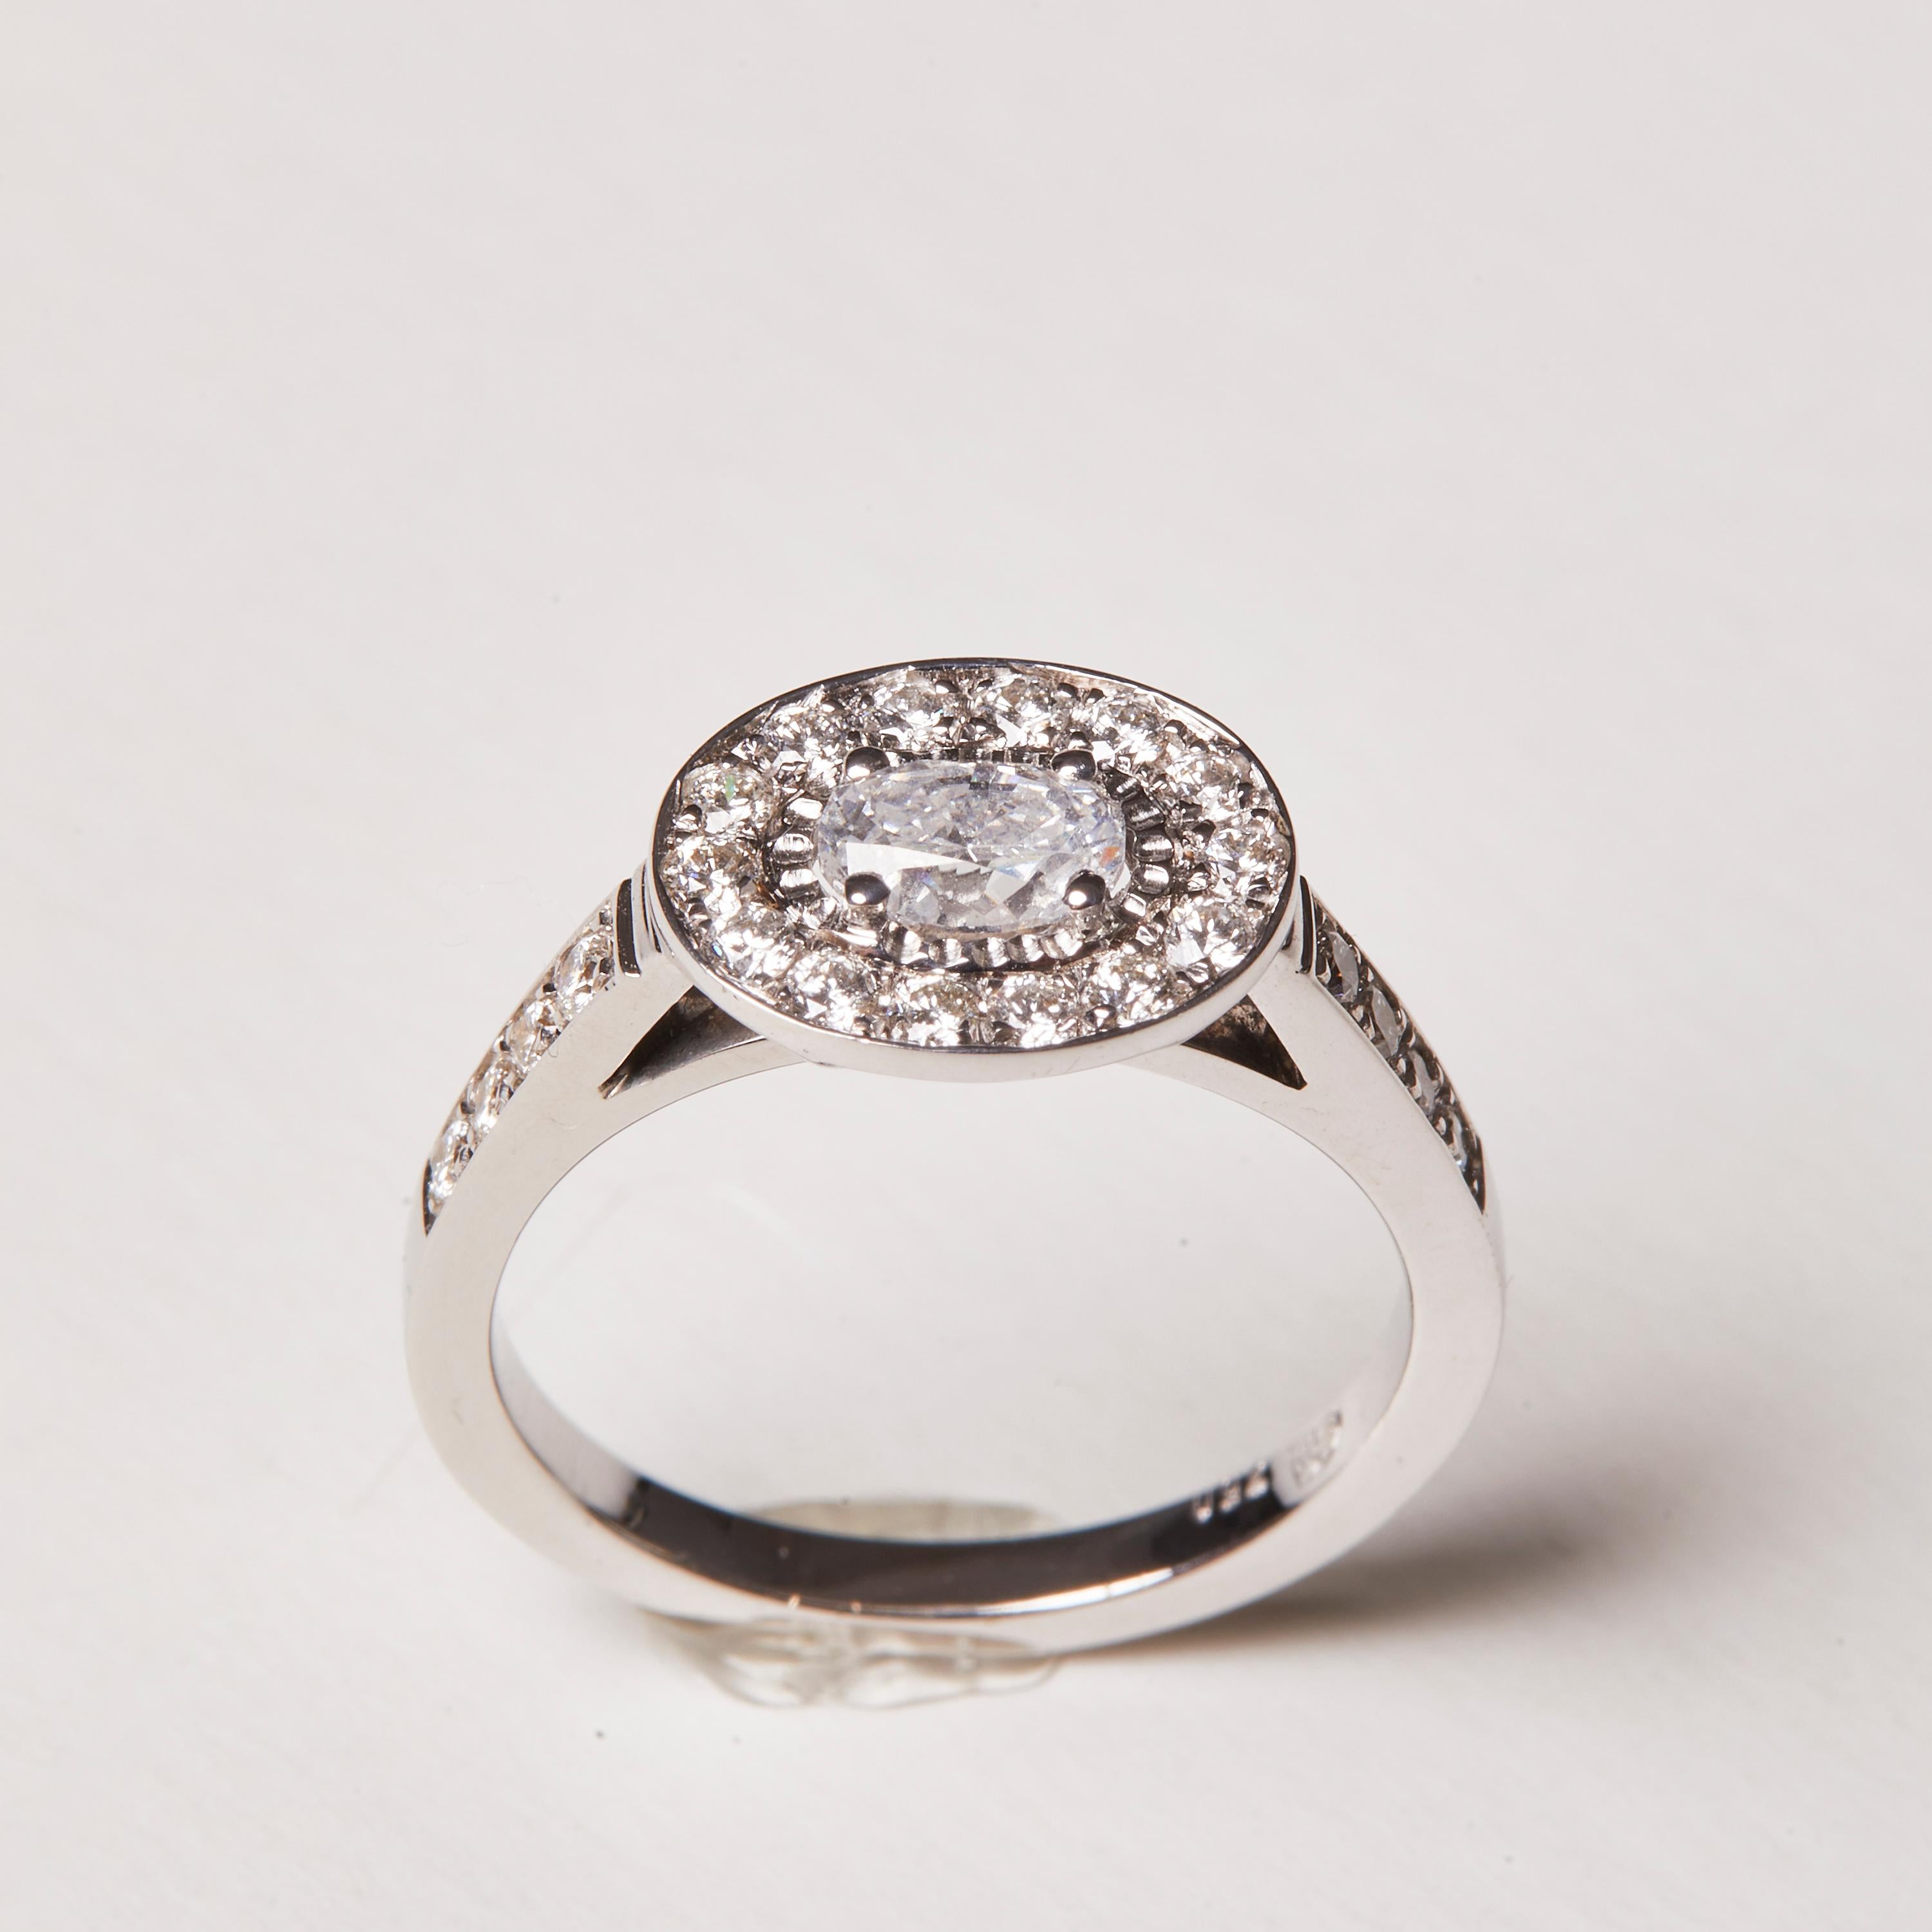 
This 18 Karat white gold cocktail ring will be your next every day go-to-piece! A beautiful oval cut diamond as the mail centerpiece, with a halo of more sparkling diamonds and a pave finish along the ring sides. 

If you like it a bit more